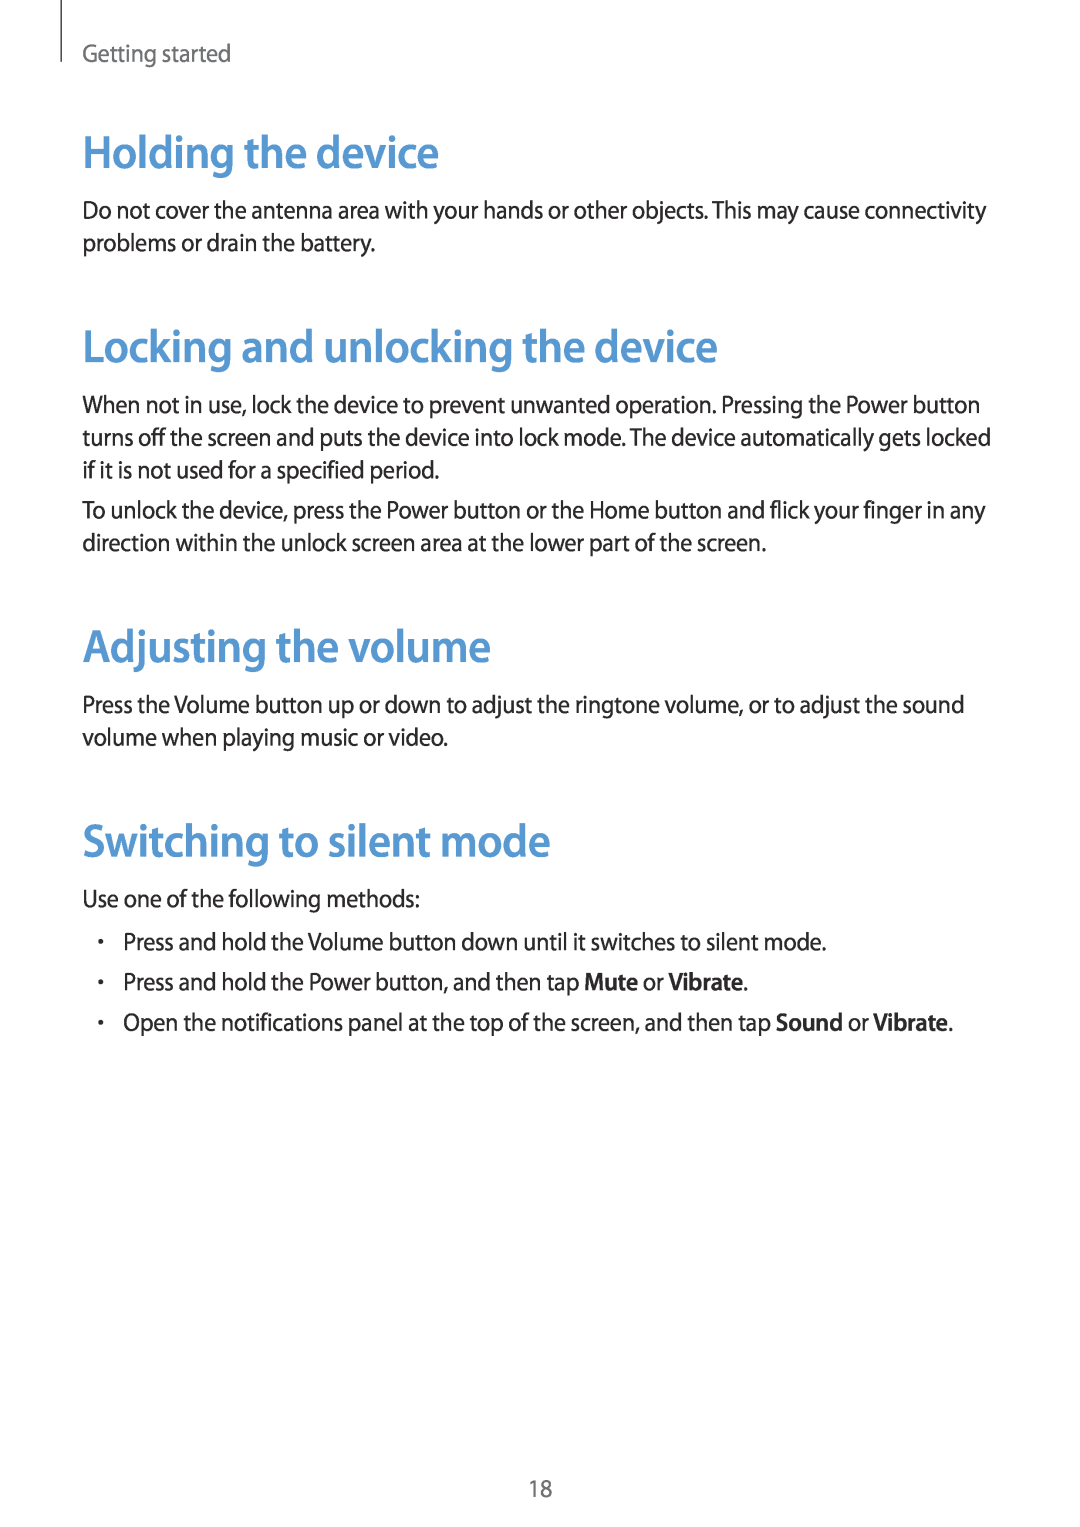 Samsung GT-I9060ZWDPHE manual Holding the device, Locking and unlocking the device, Adjusting the volume, Getting started 